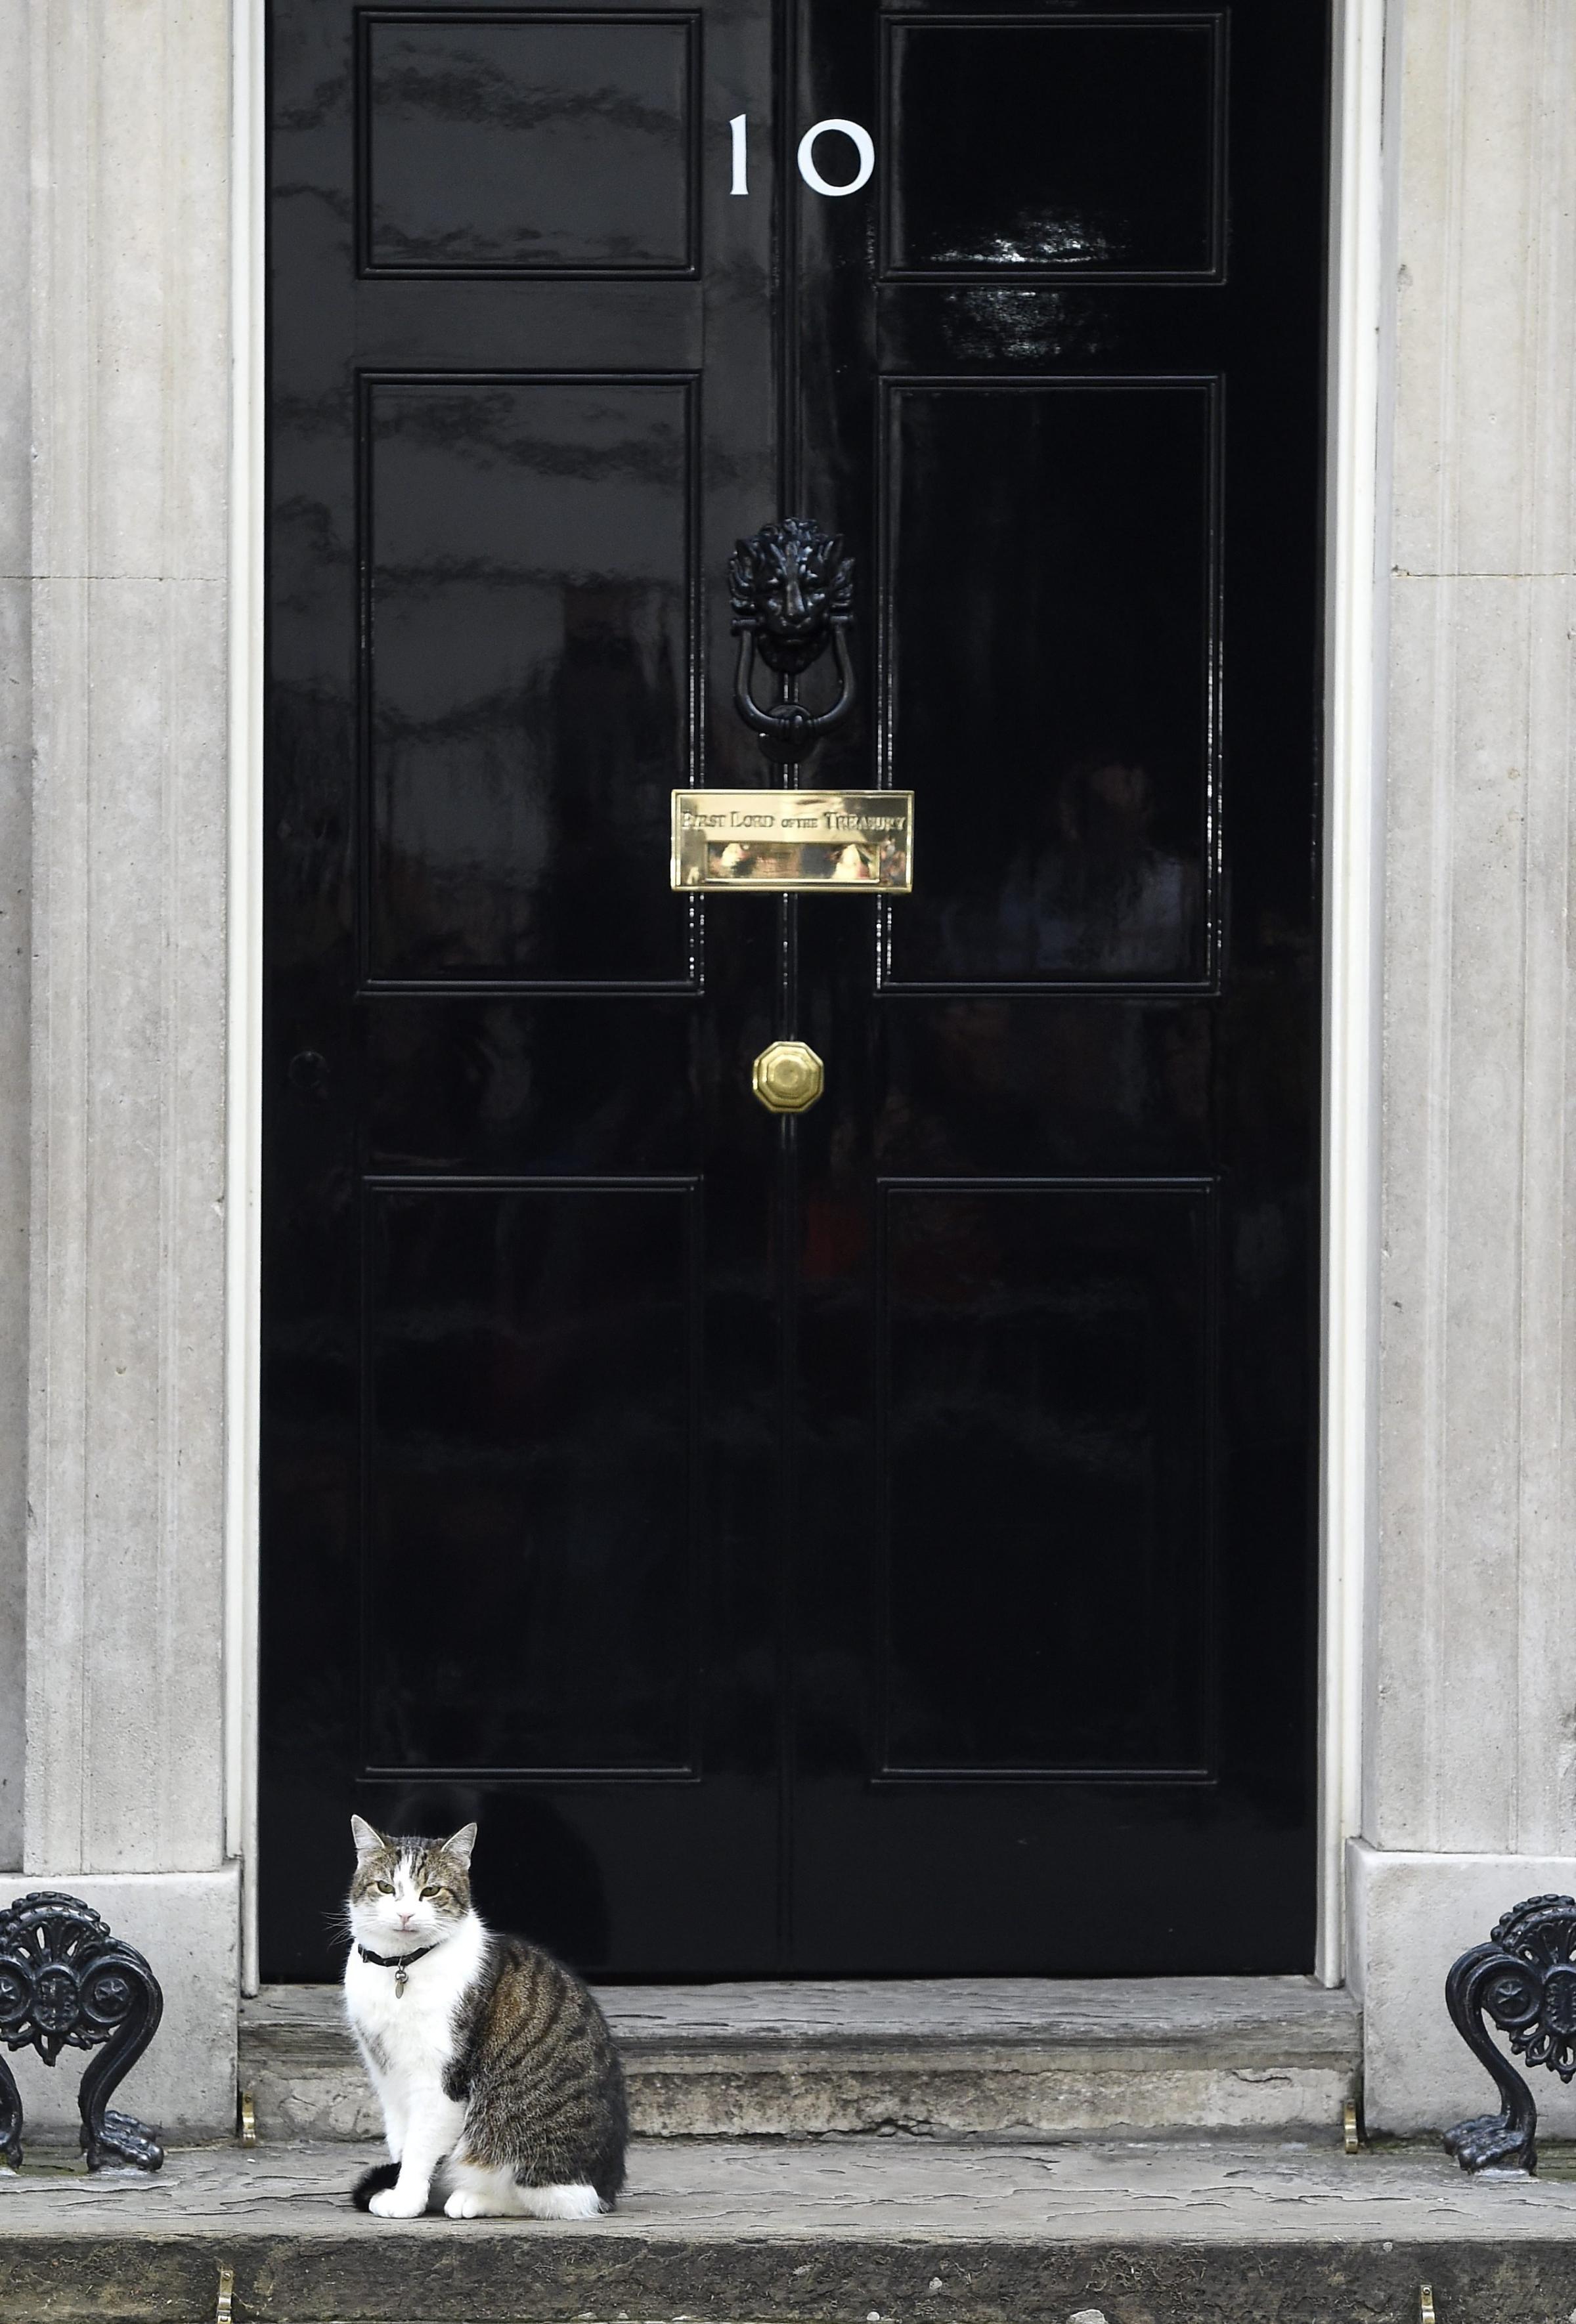 Larry, The Downing Street Cat, stands outside N10 Downing Street in London, on June 24, 2016.